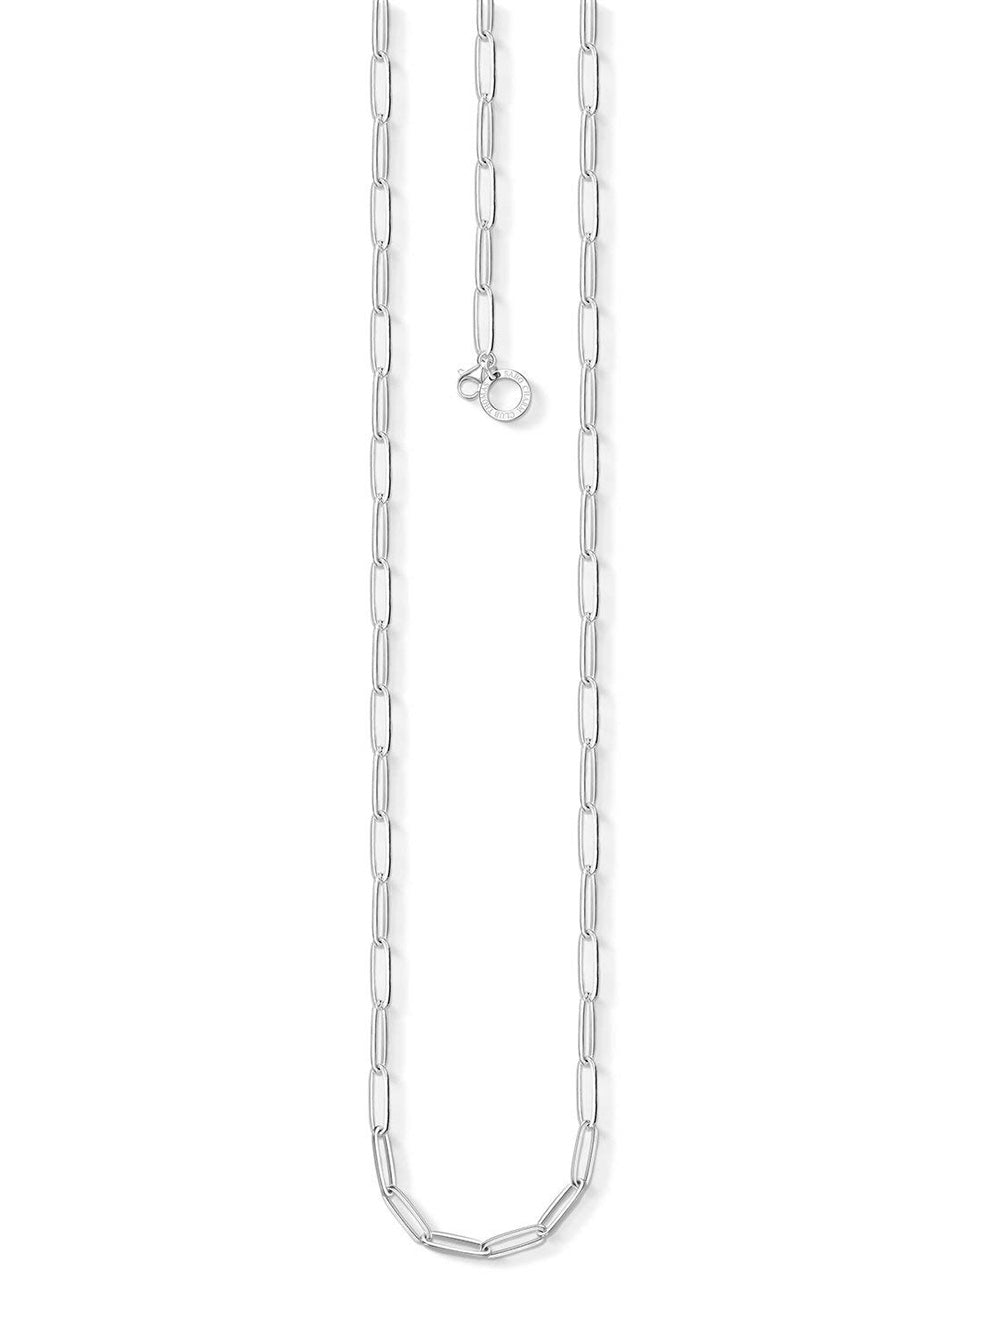 Thomas Sabo Charms necklace for X0268-001-21-L45 45cm